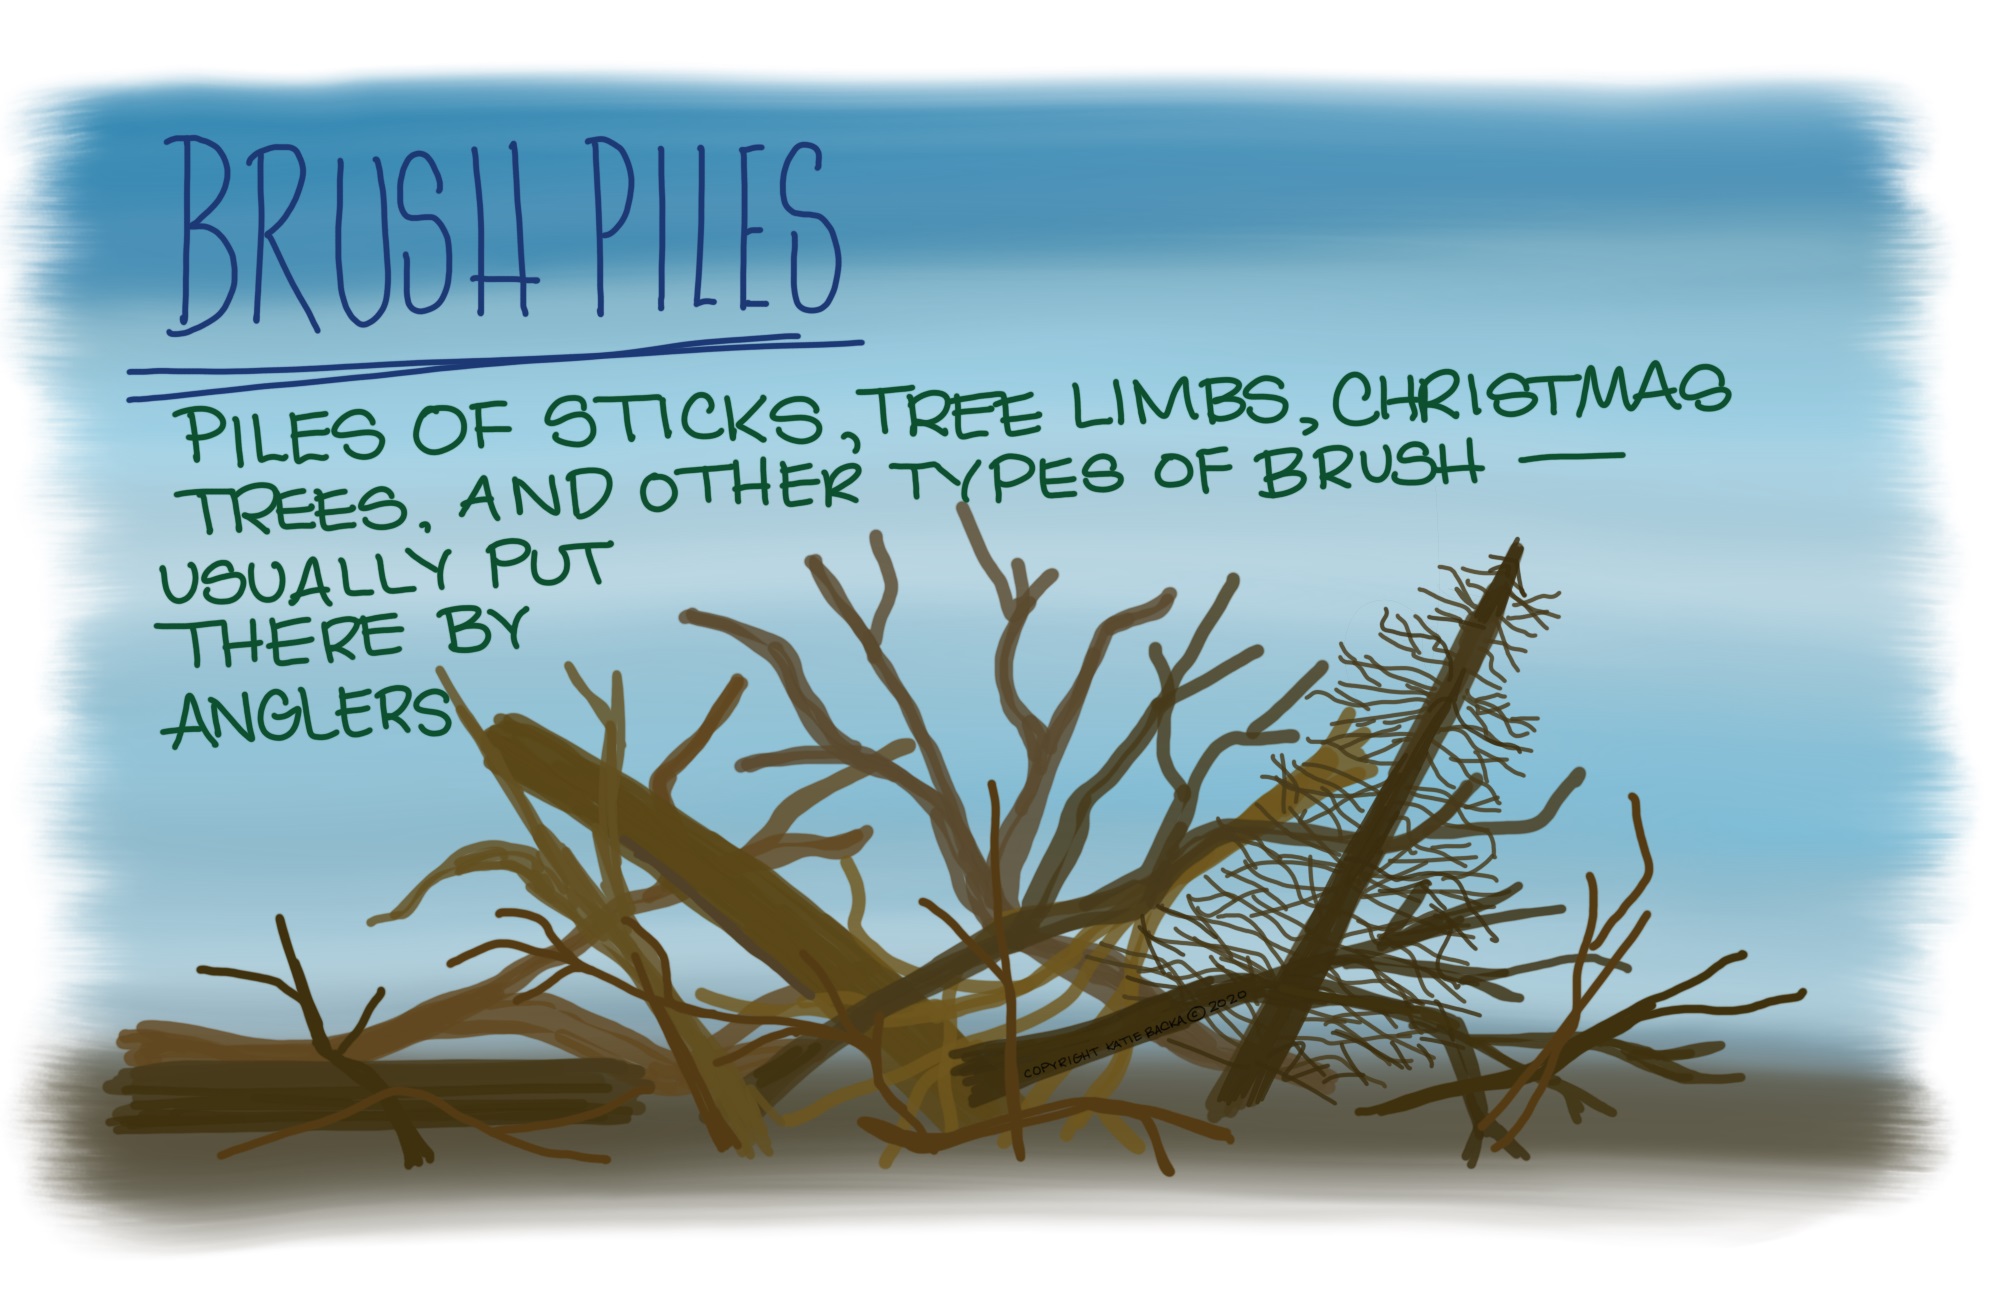 Script: Brush piles, piles of sticks, tree limbs, Christmas trees, and other types of brush - usually put there by anglers